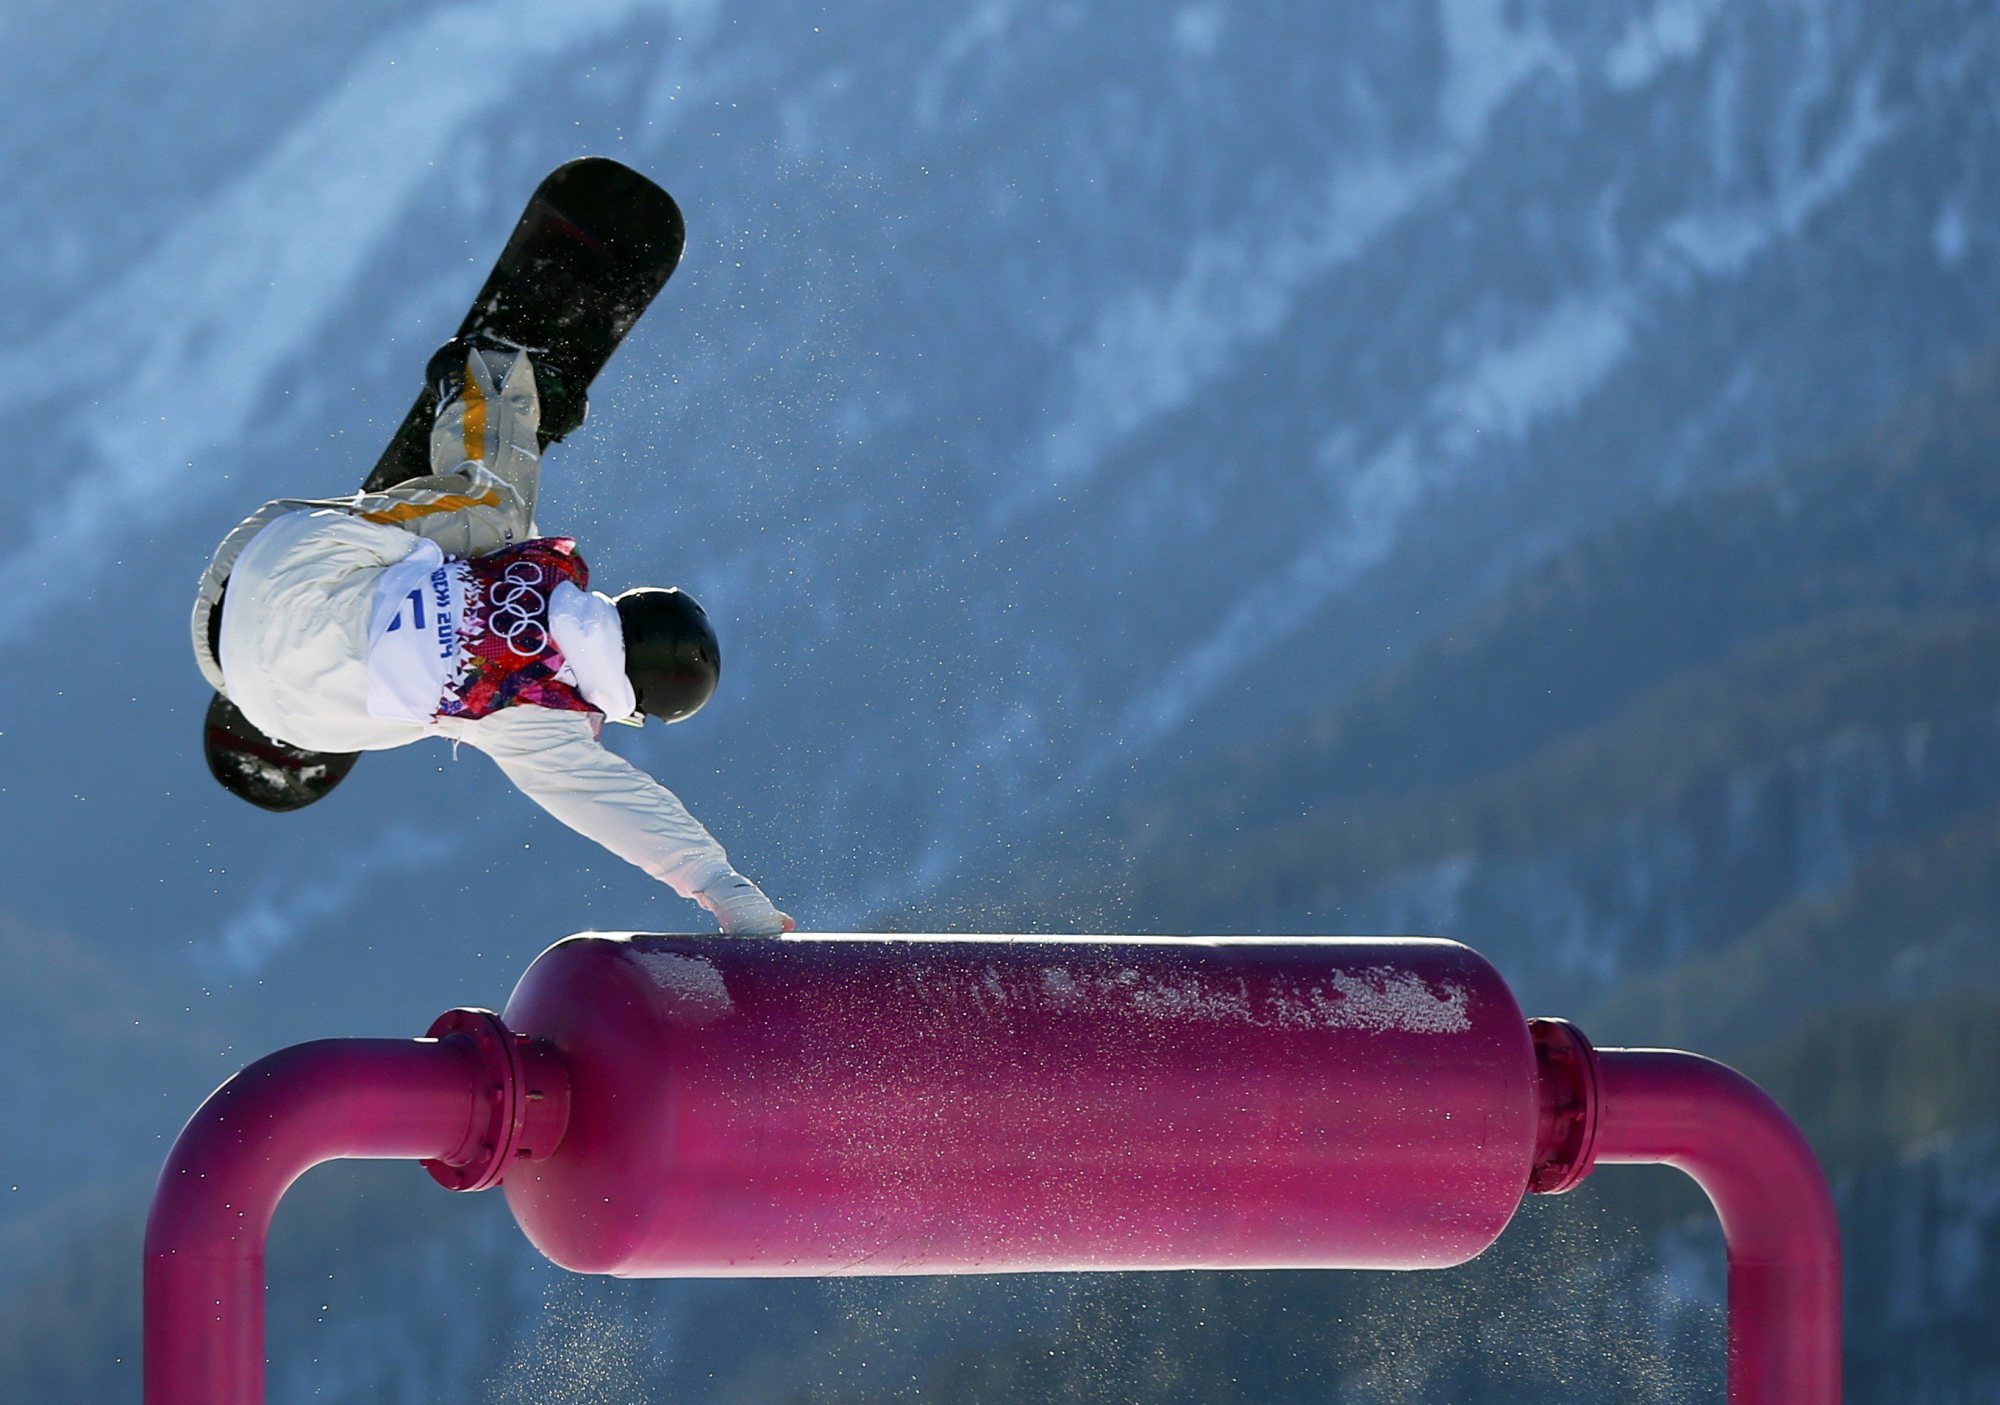 Sweden's Niklas Mattsson performs a jump during the men's slopestyle snowboarding qualifying session at the 2014 Sochi Olympic Games in Rosa Khutor, February 6, 2014.